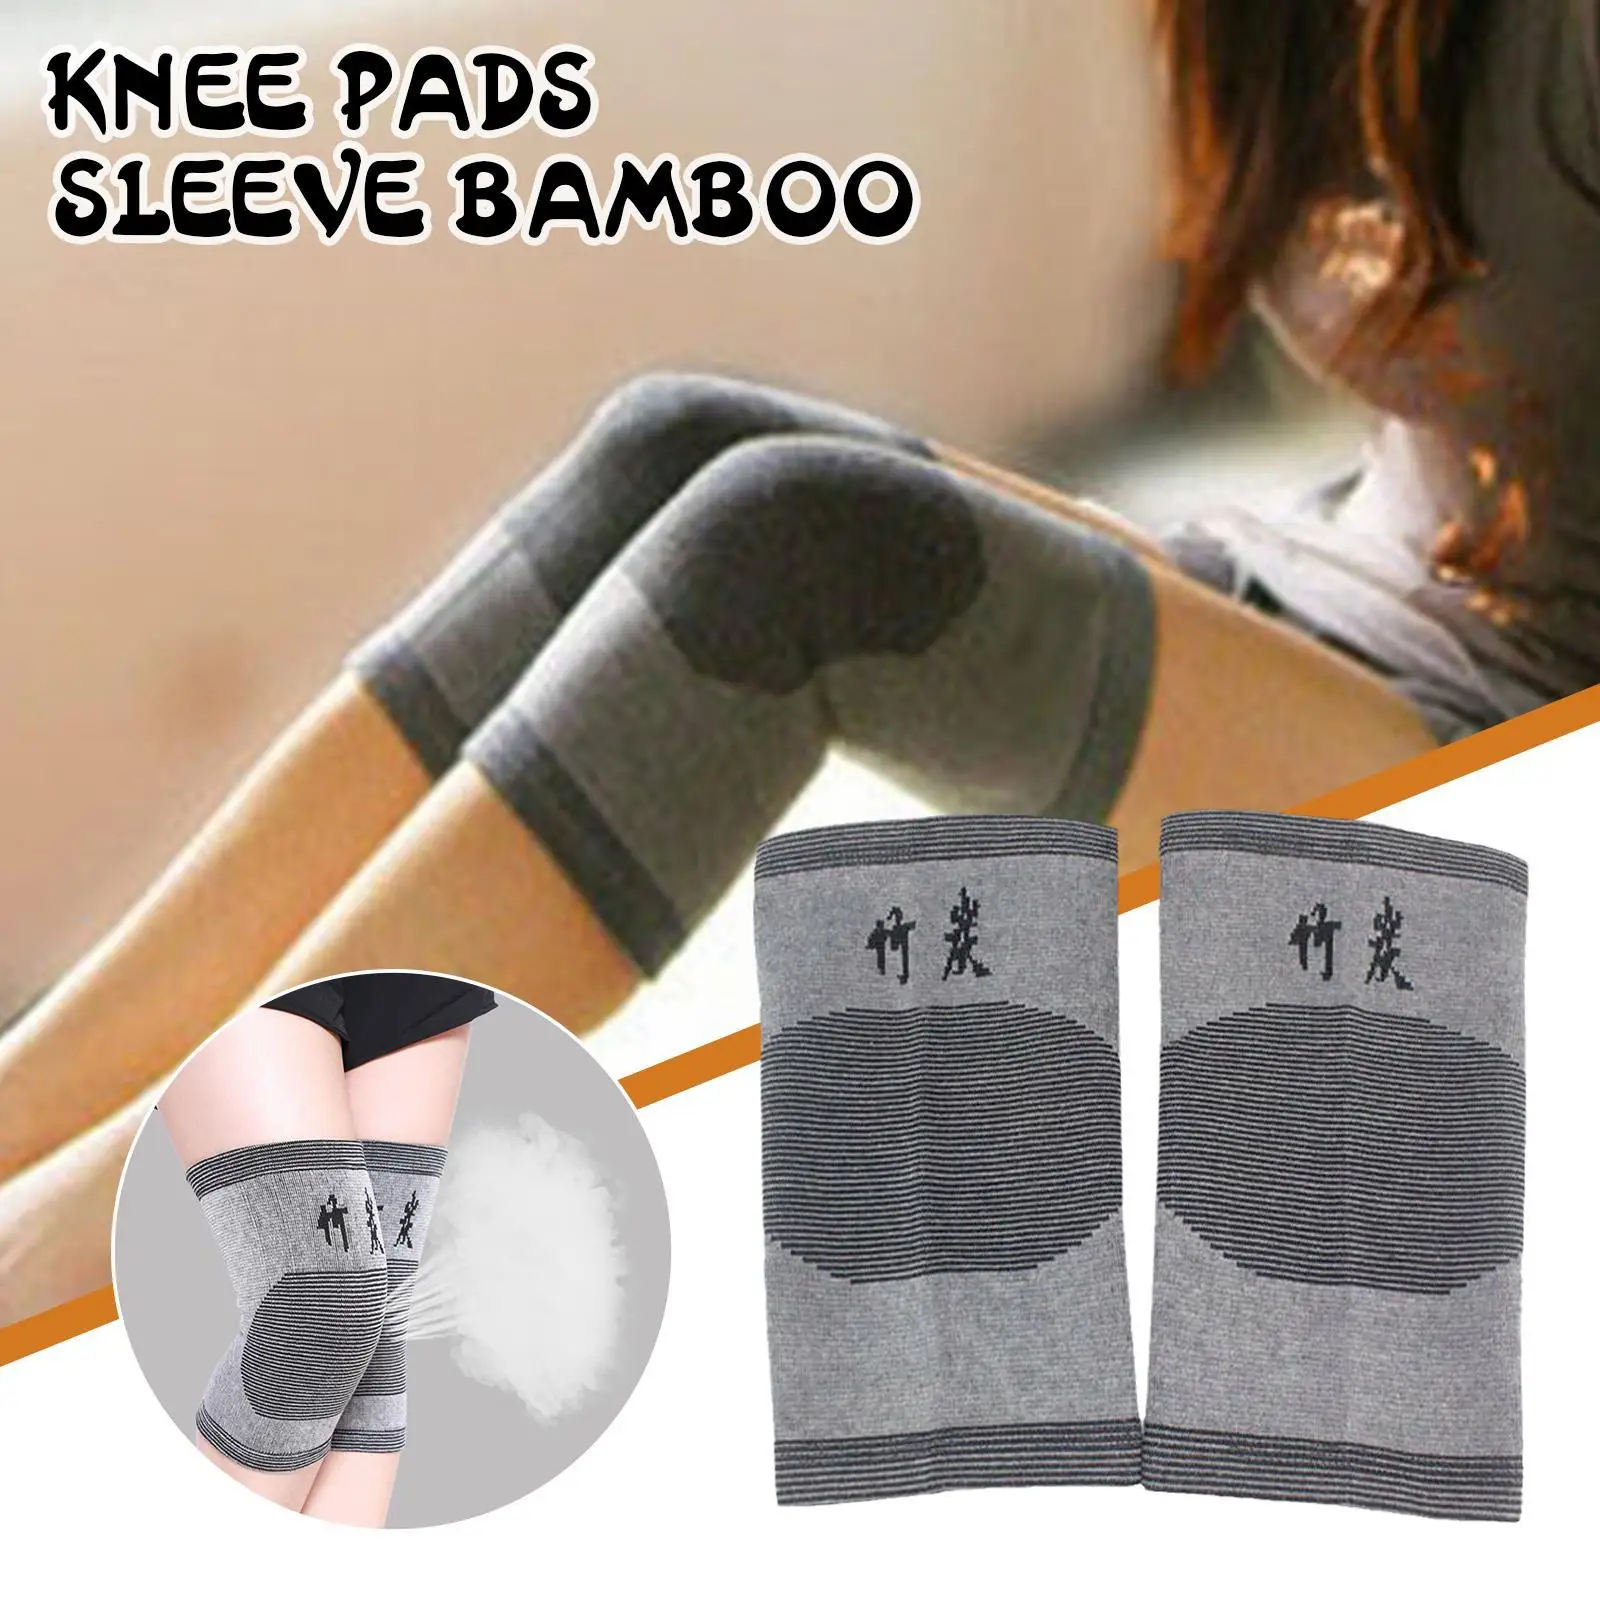 2pc Bamboo Charcoal Knee Sleeves Elastic Warm Knee Brace Kneecap Pads Unisex Knee Support For Joint Pain & Arthritis Pain Relief